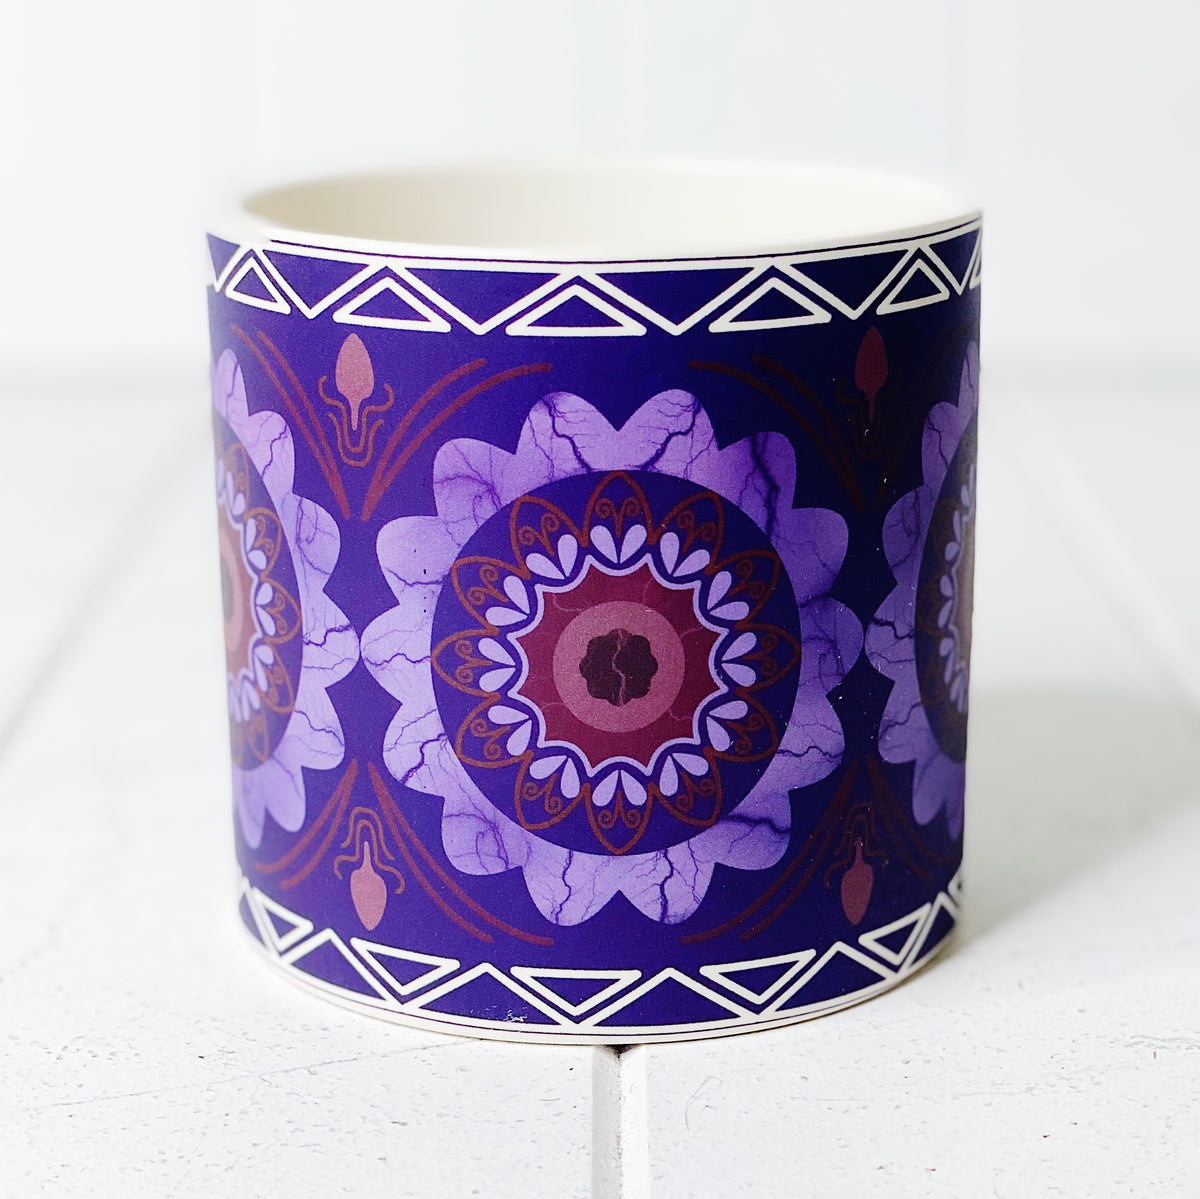 Our gorgeous Medium Nyla Pots create a unique style with bold shapes and bright shades of blues, reds and browns - Drainage hole and plug perfect for indoor and outdoor use - Available in 6 styles Measures: 10x10x10cm - Ceramic | Bliss Gifts &amp; Homewares | Unit 8, 259 Princes Hwy Ulladulla | South Coast NSW | Online Retail Gift &amp; Homeware Shopping | 0427795959, 44541523